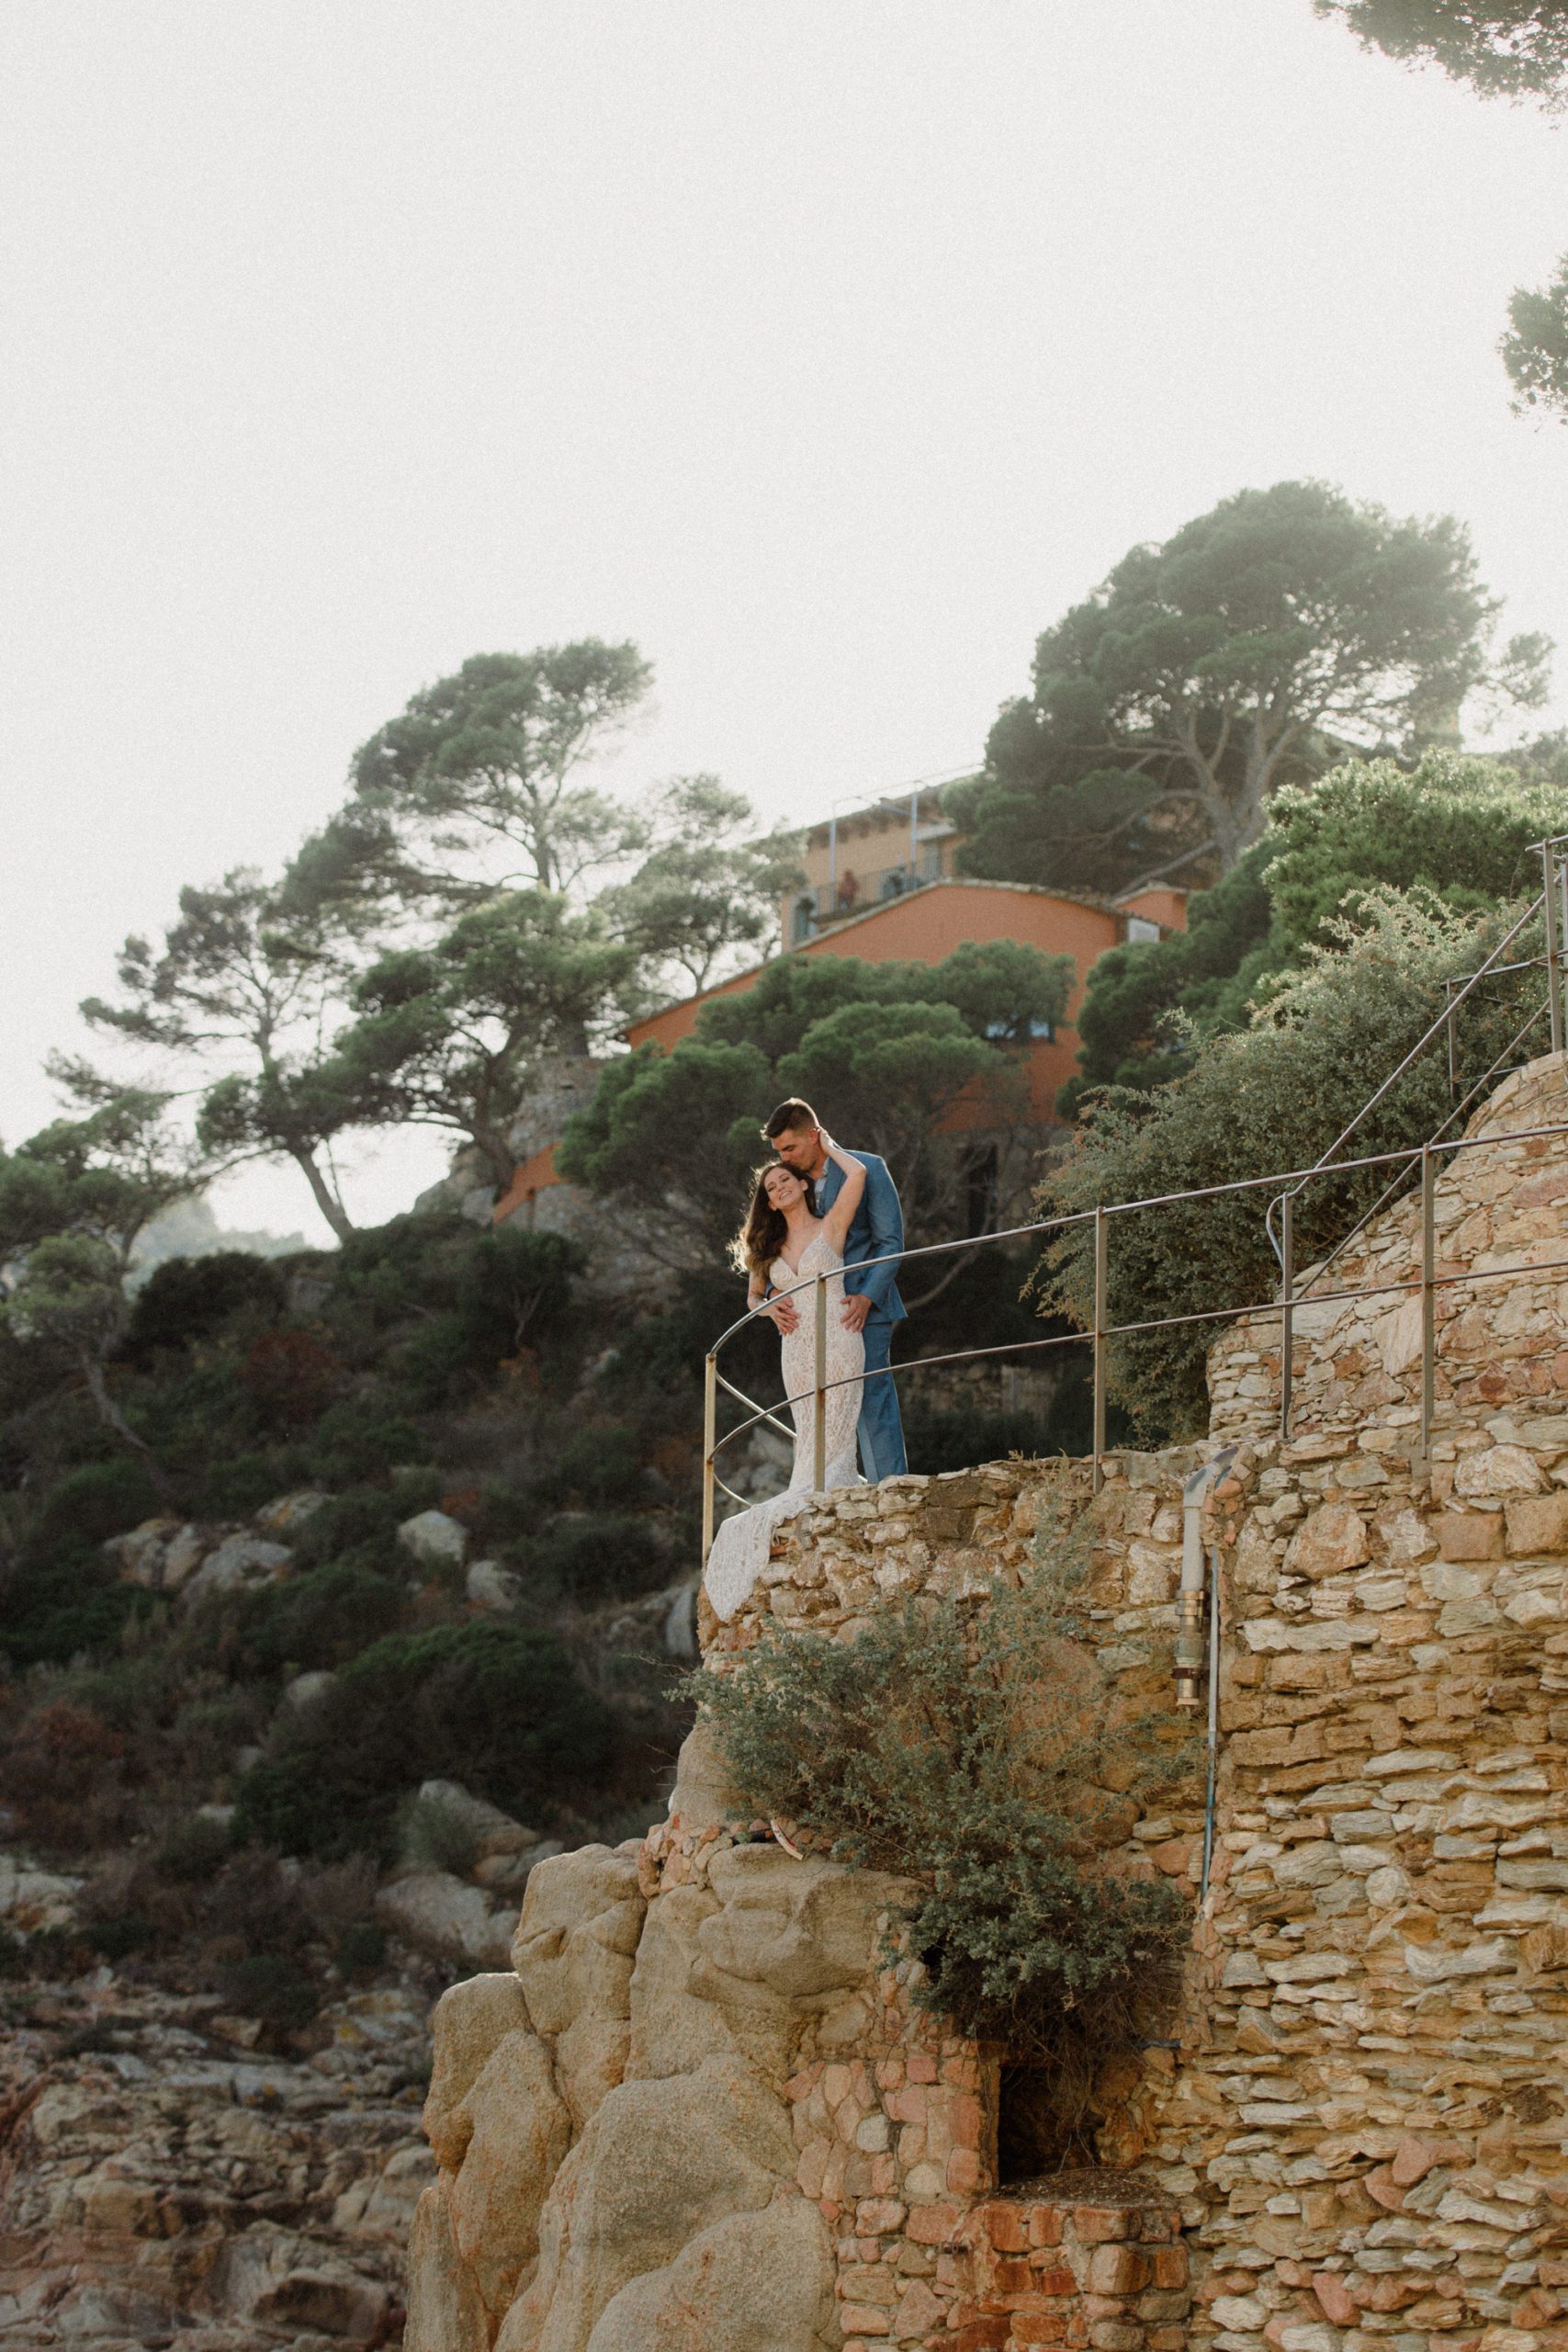  This Costa Brava 2 day Elopement couple spent two days exploring the area and saying vows in the cove of Cala d' Aigua Xelida, Spain. 